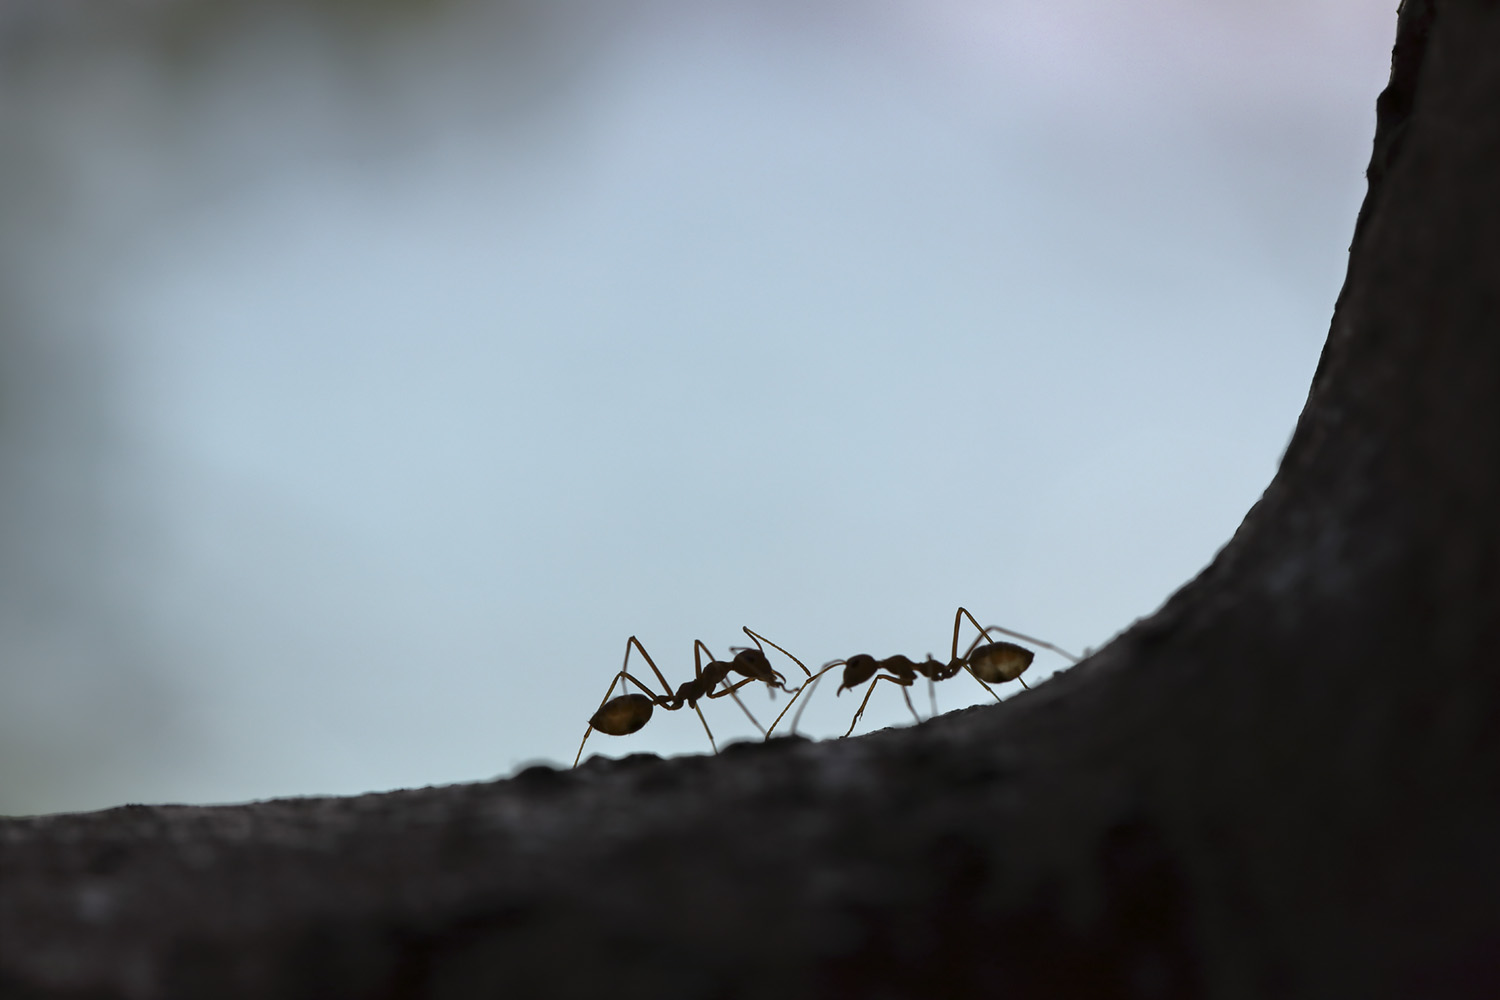 A close up silhouette of two ants walking on a tree limb.